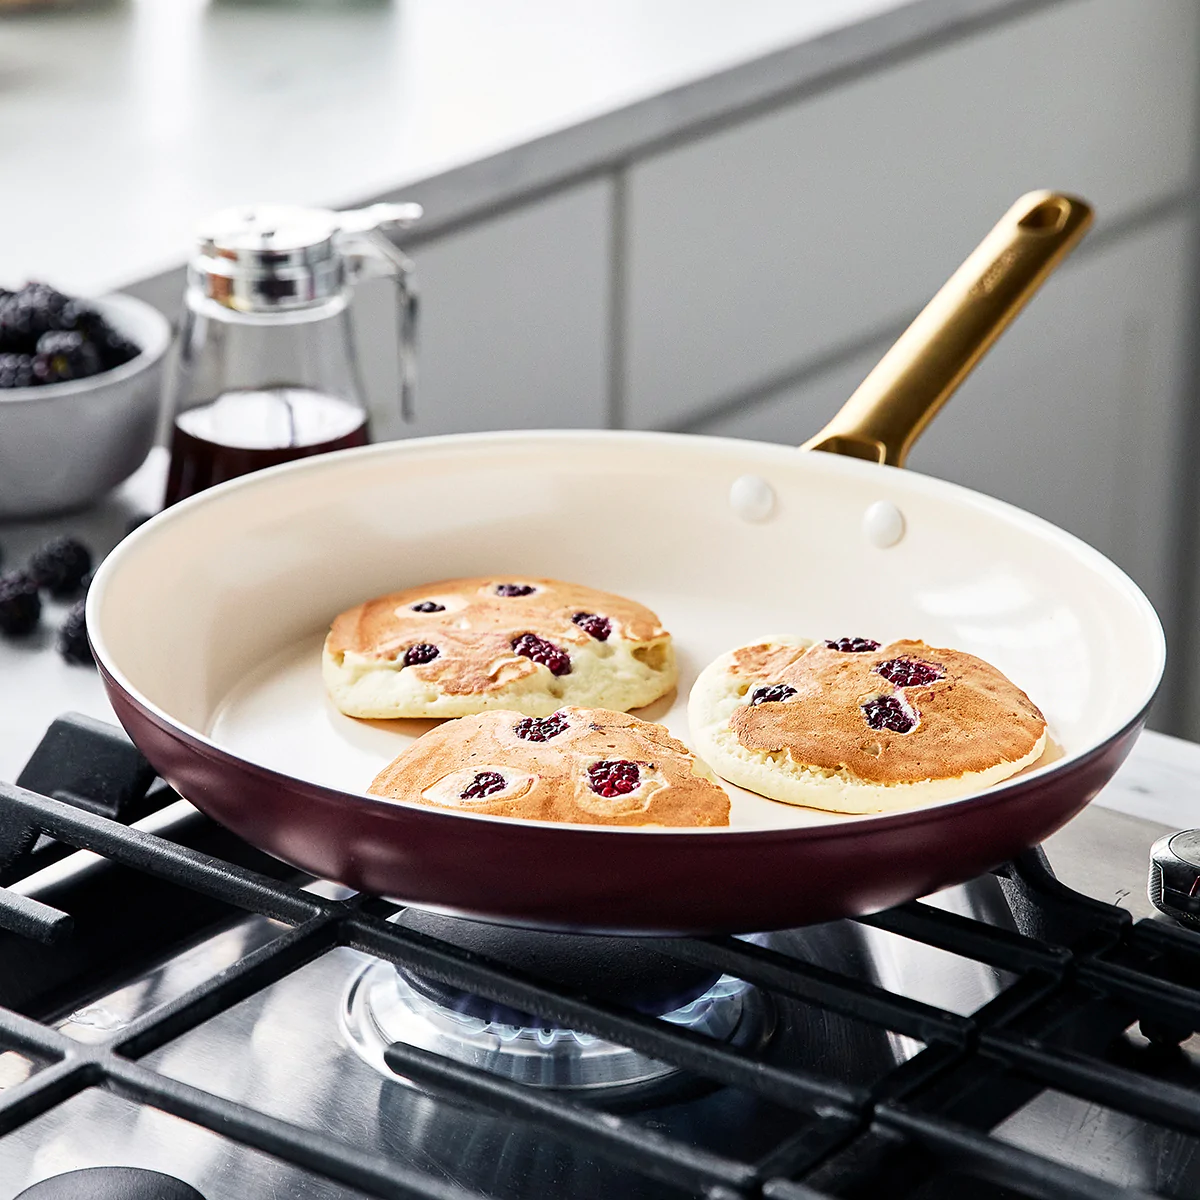 HENCKELS CLAD CFX STAINLESS STEEL CERAMIC NONSTICK FRY PAN - The Peppermill